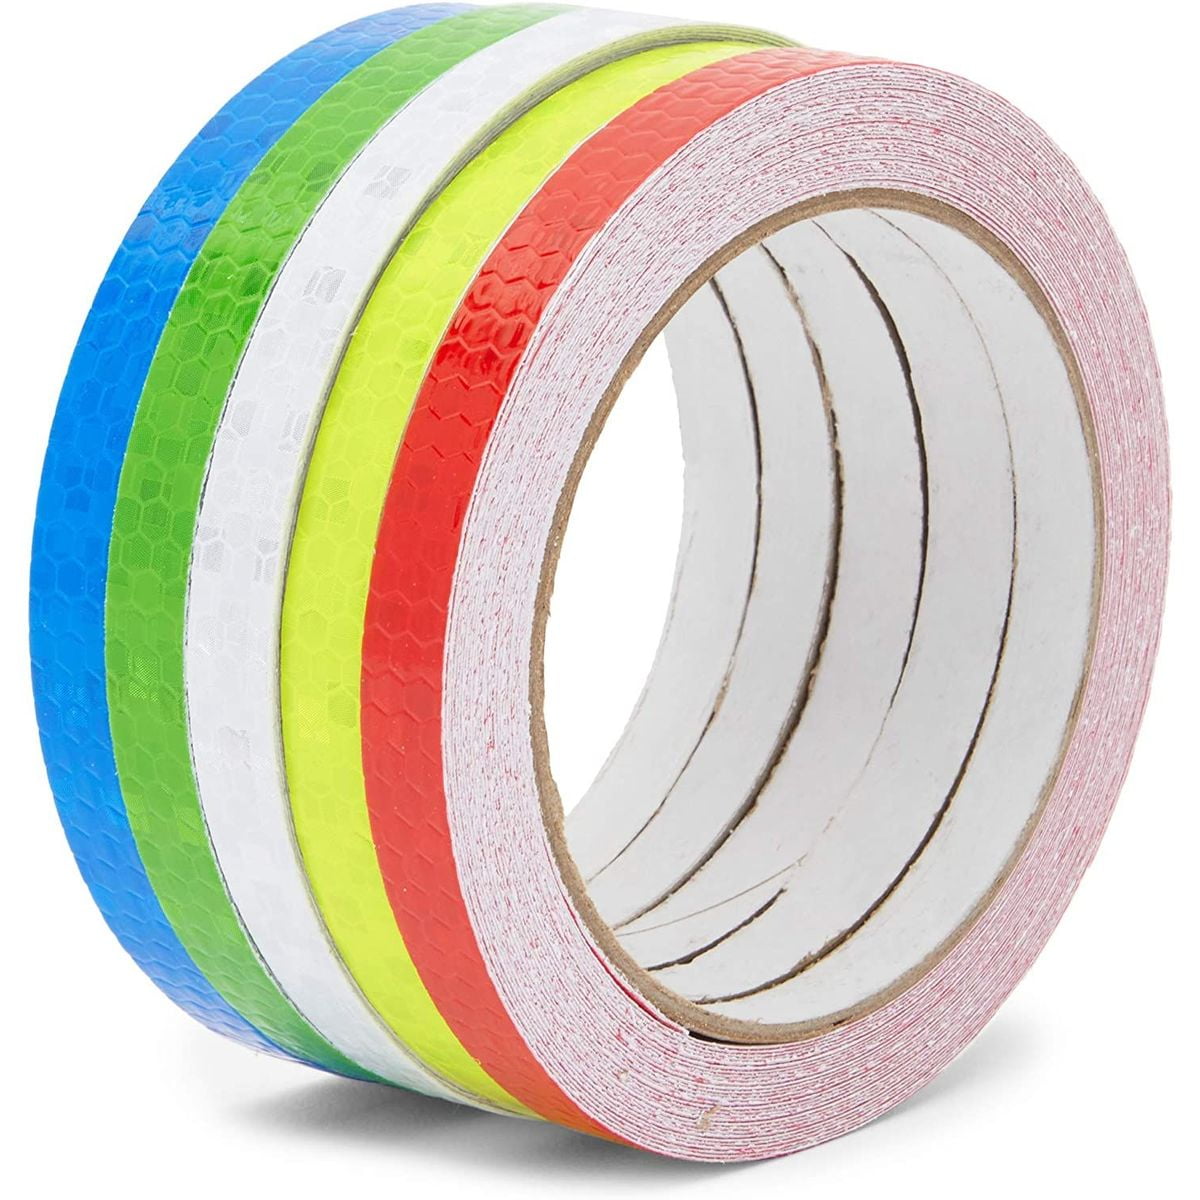 Silver Metallic Fluorescent Reflective Scotchlite Water Resistant Safety Tape 